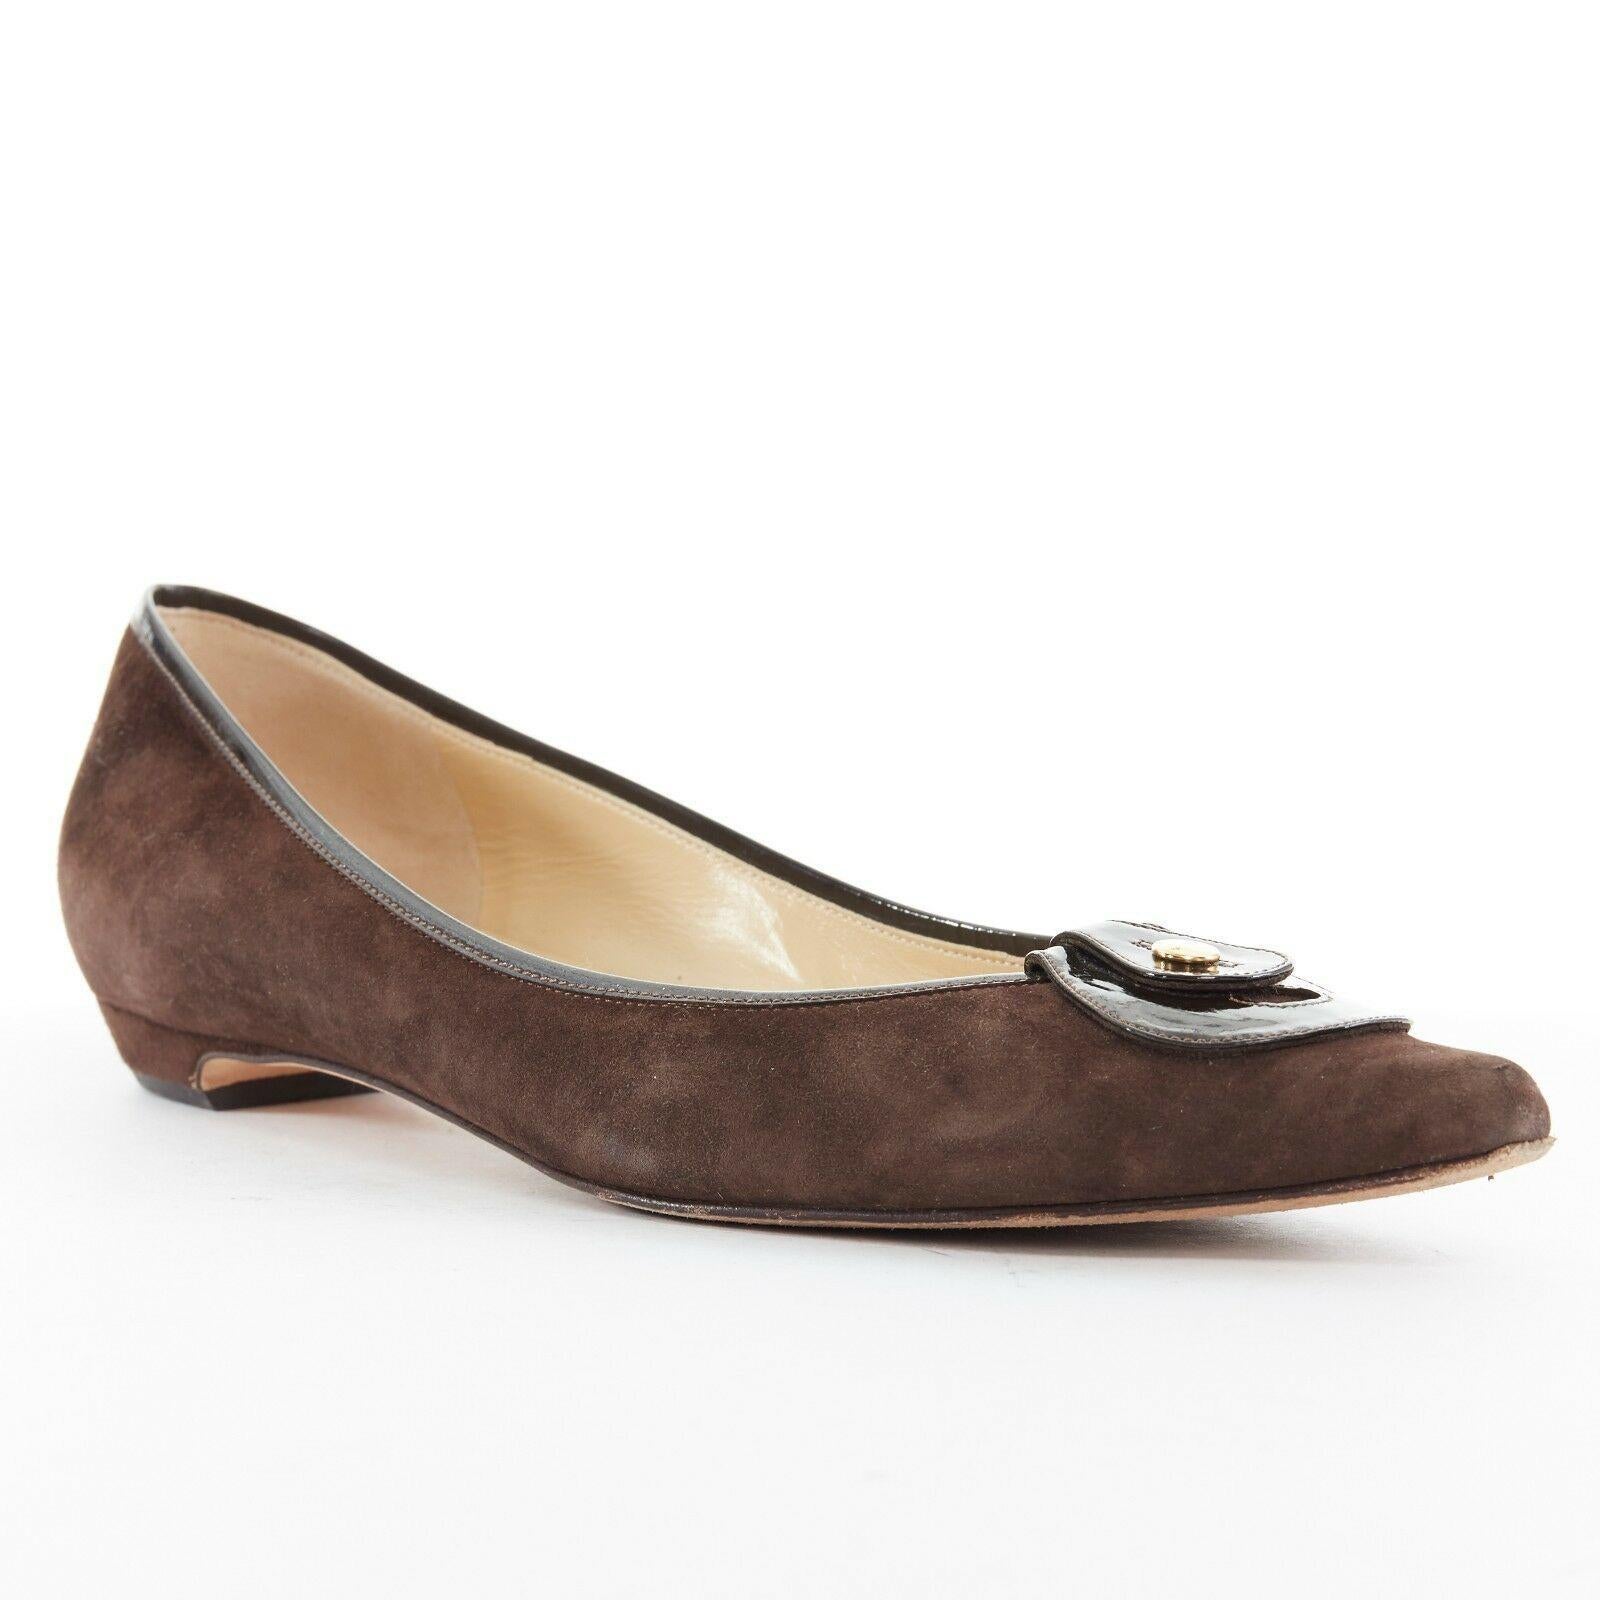 brown suede flat shoes